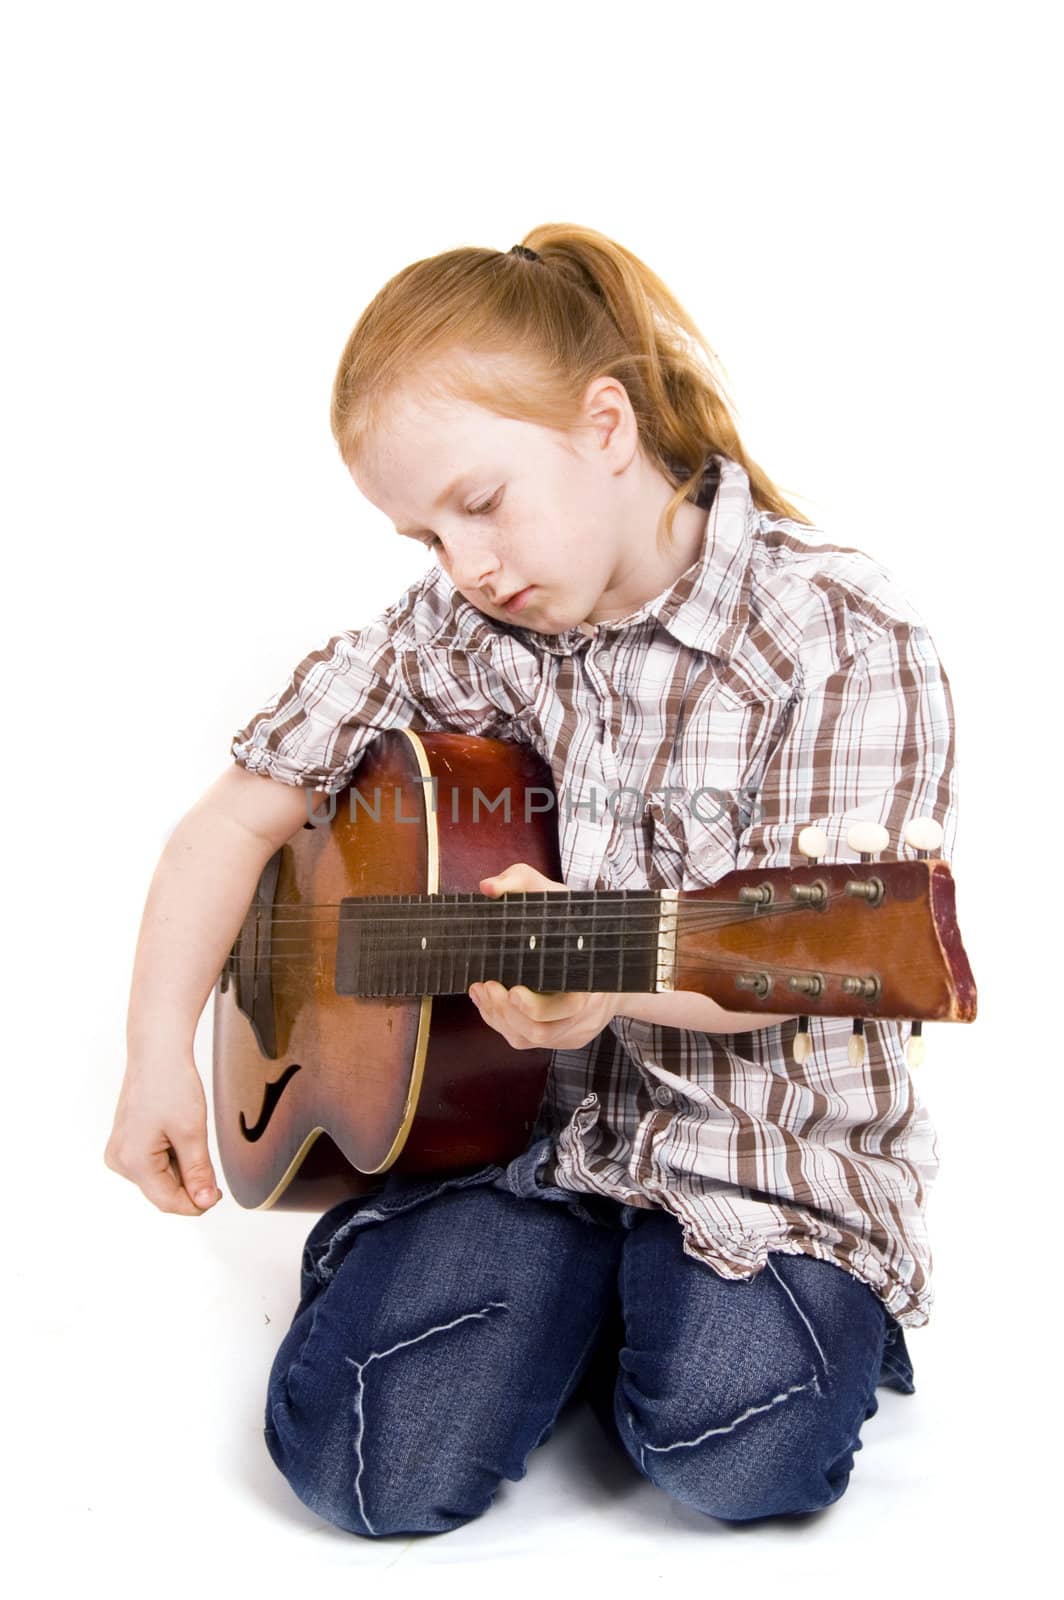 little girl playing on a guitar

